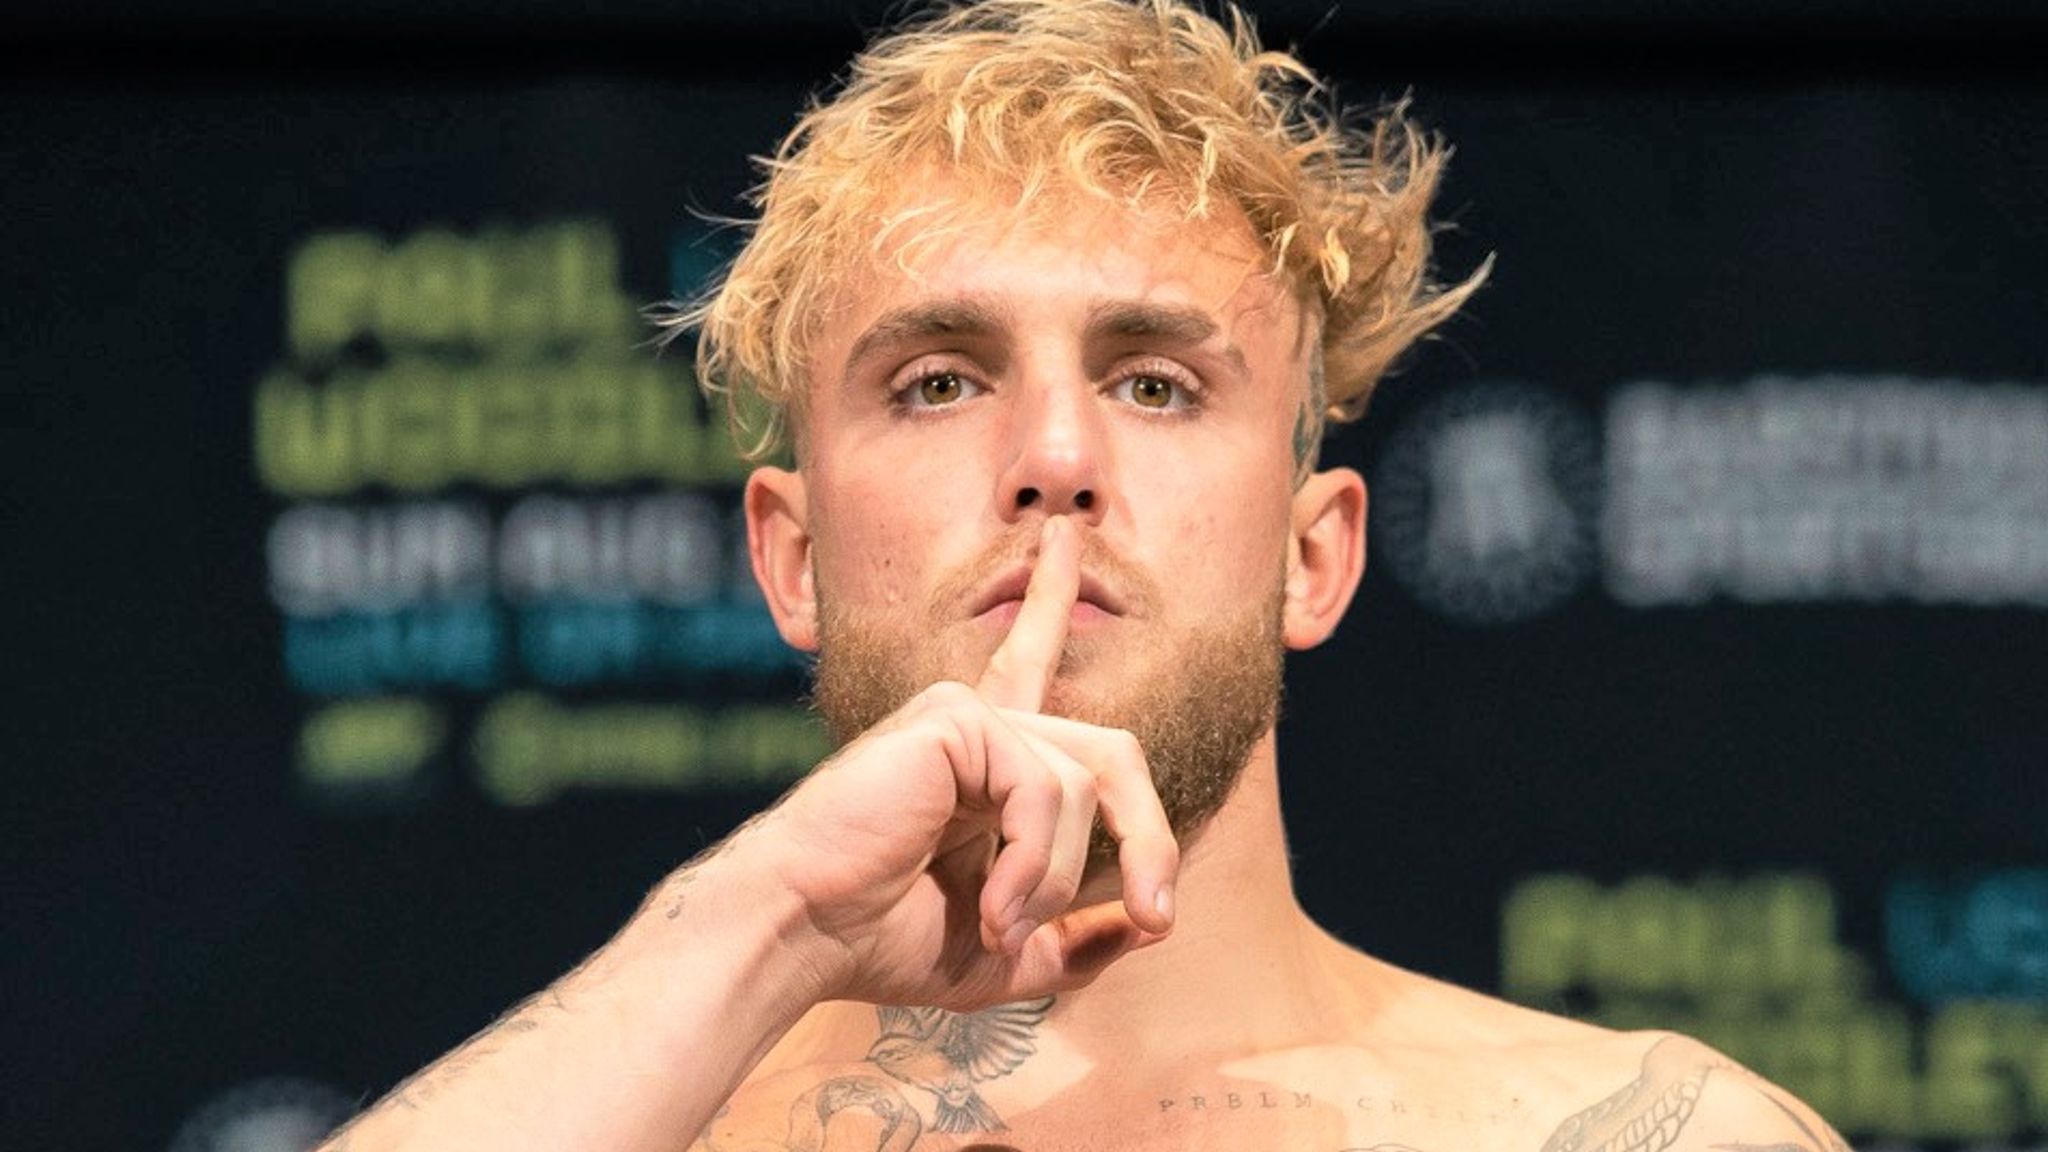 Logan Paul brother is adamant on rematch clause in contract for Jake Paul vs Tommy Fury 